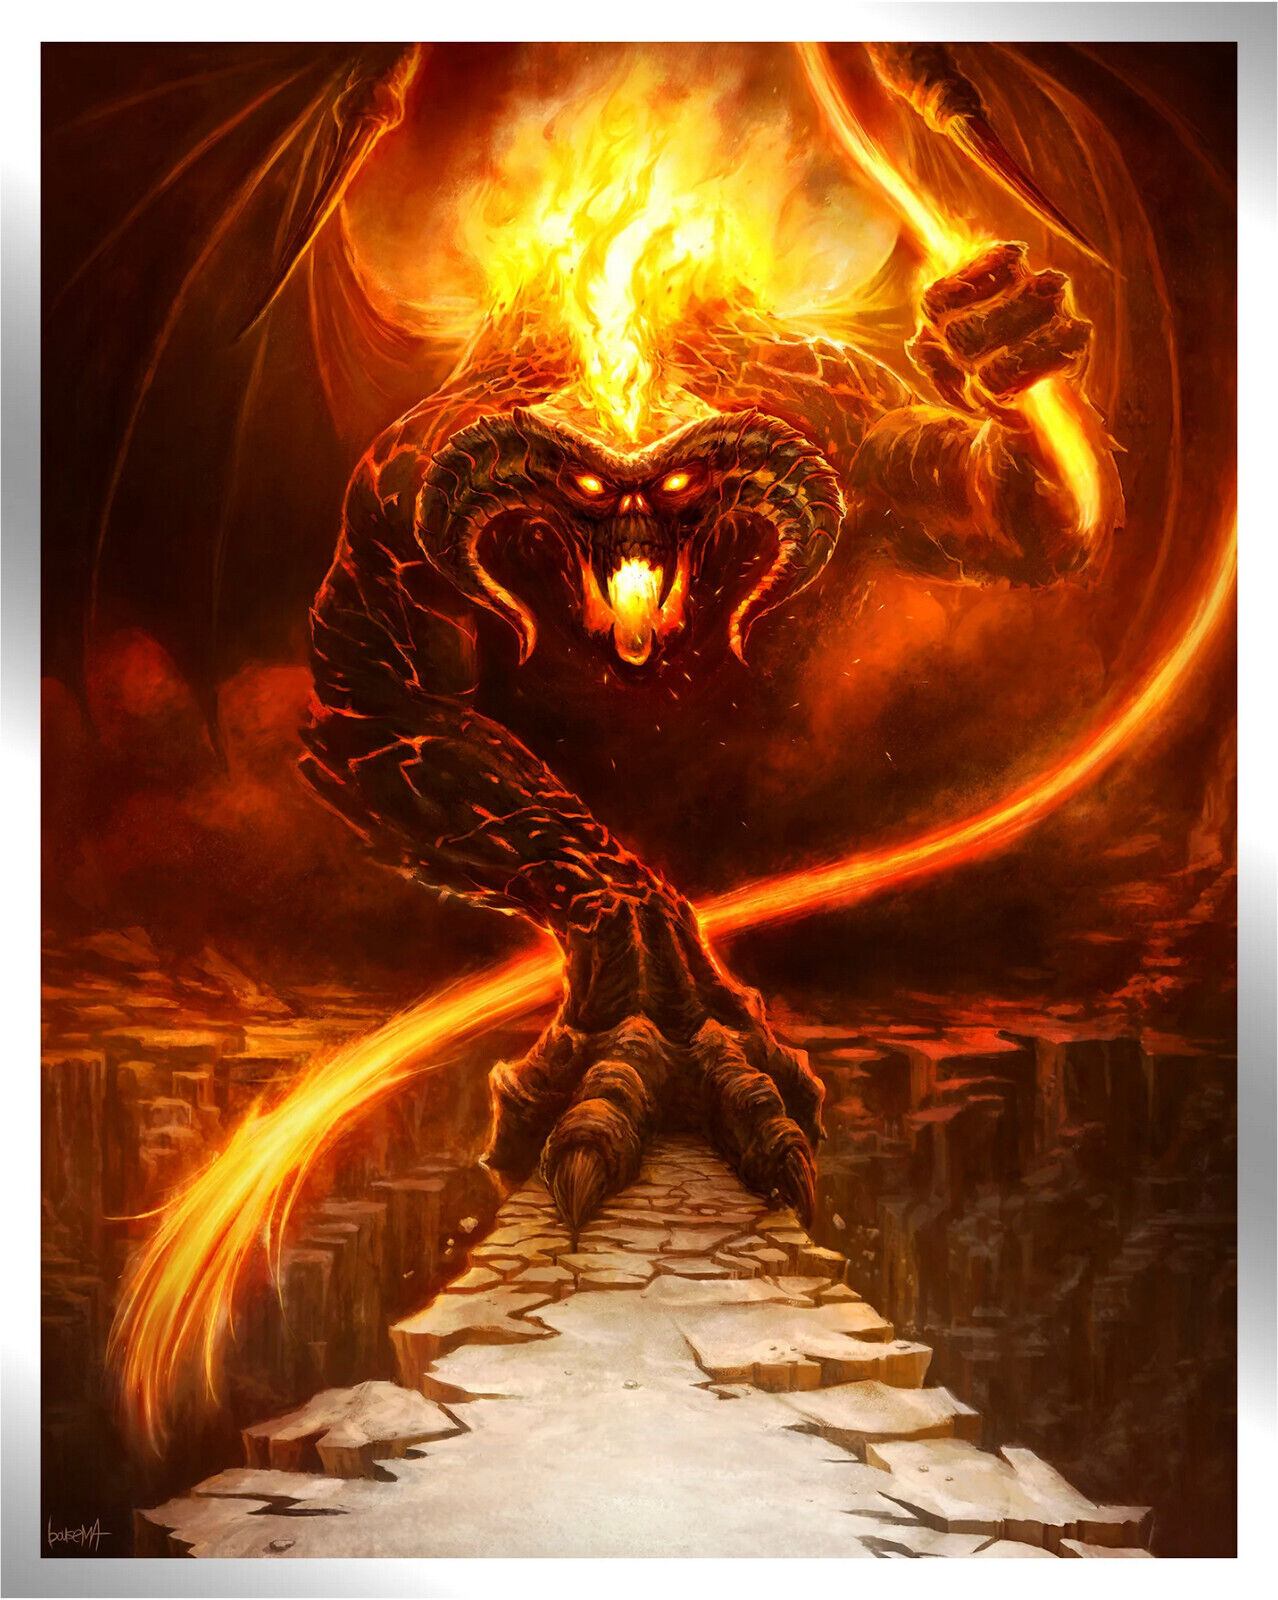 BALROG Art Print By Bousema Lord of the Rings Metallic Foil Variant Poster 2020